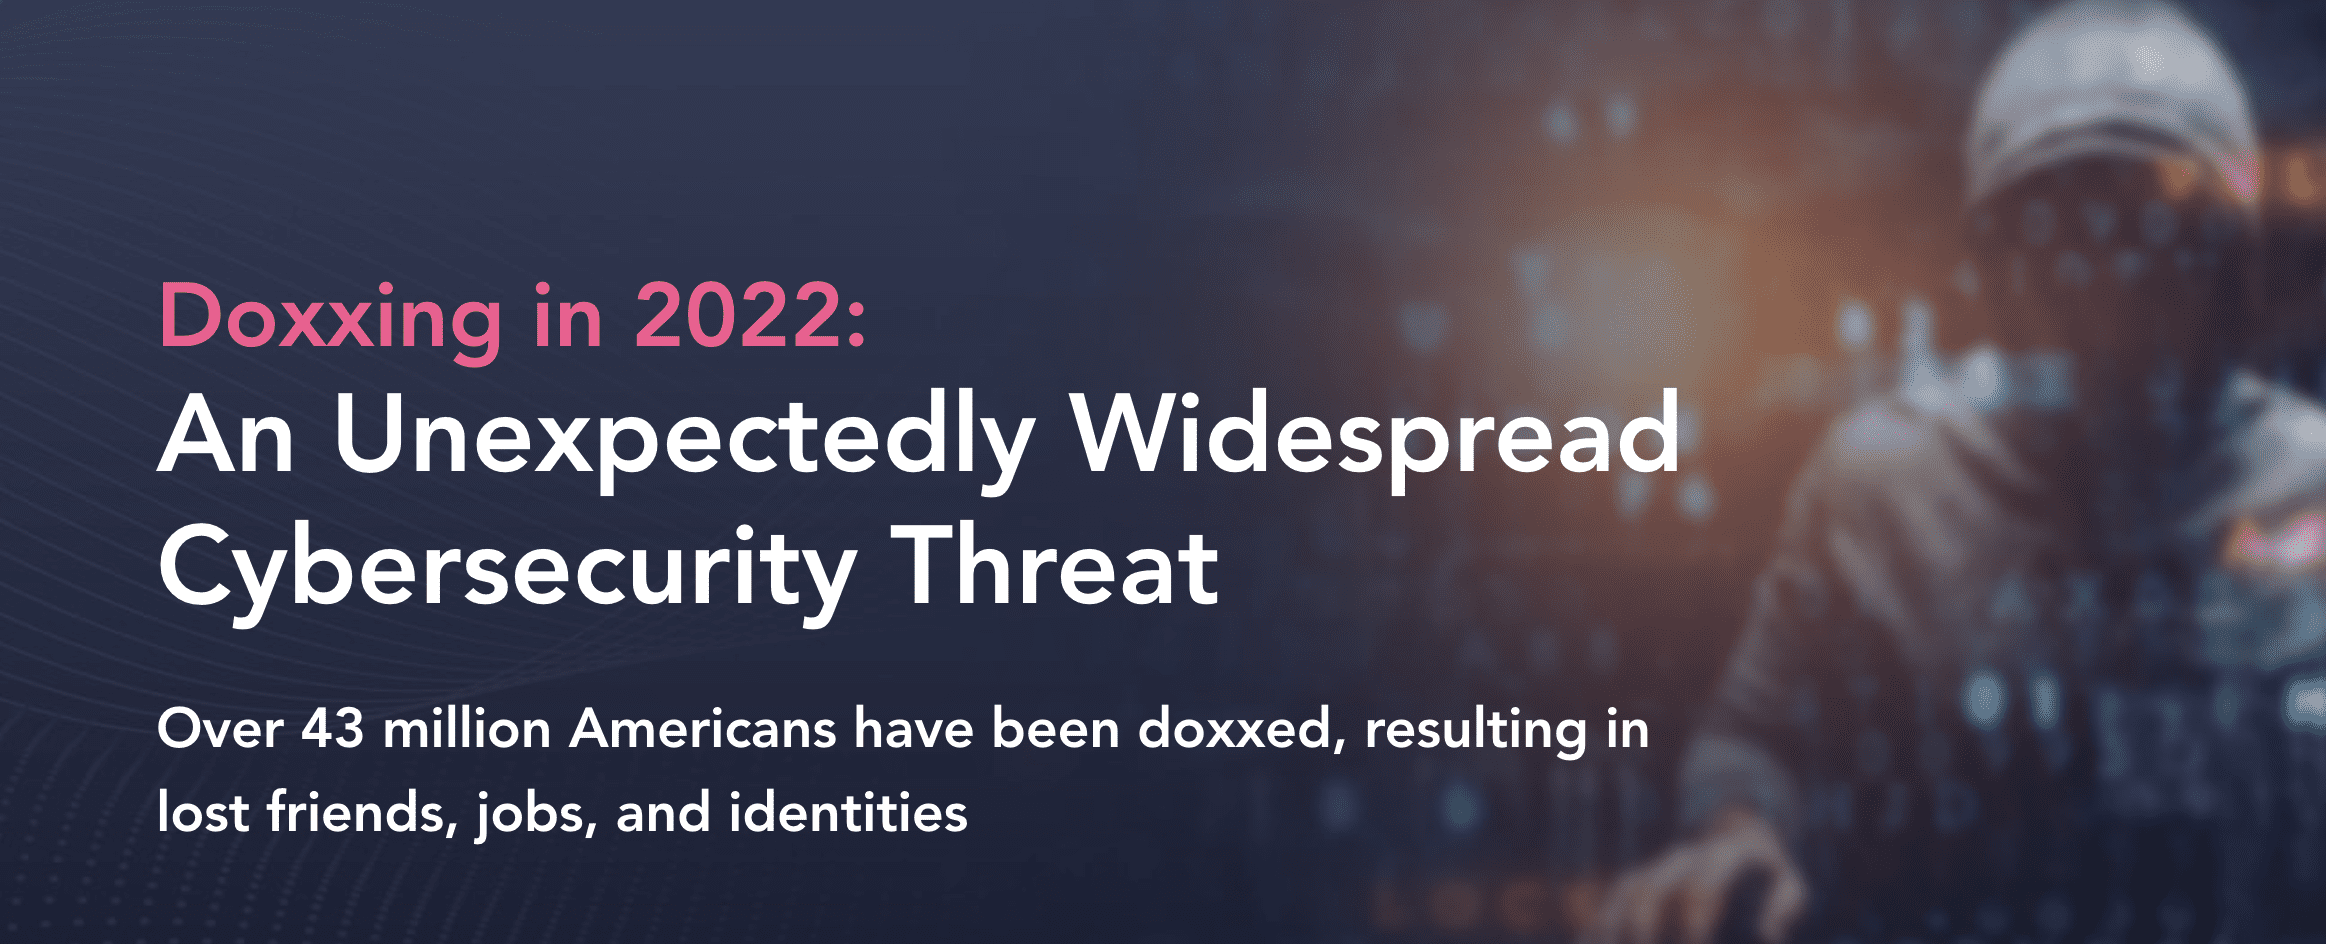 Doxxing in 2022: An Unexpectedly Widespread Cybersecurity Threat Featured Image